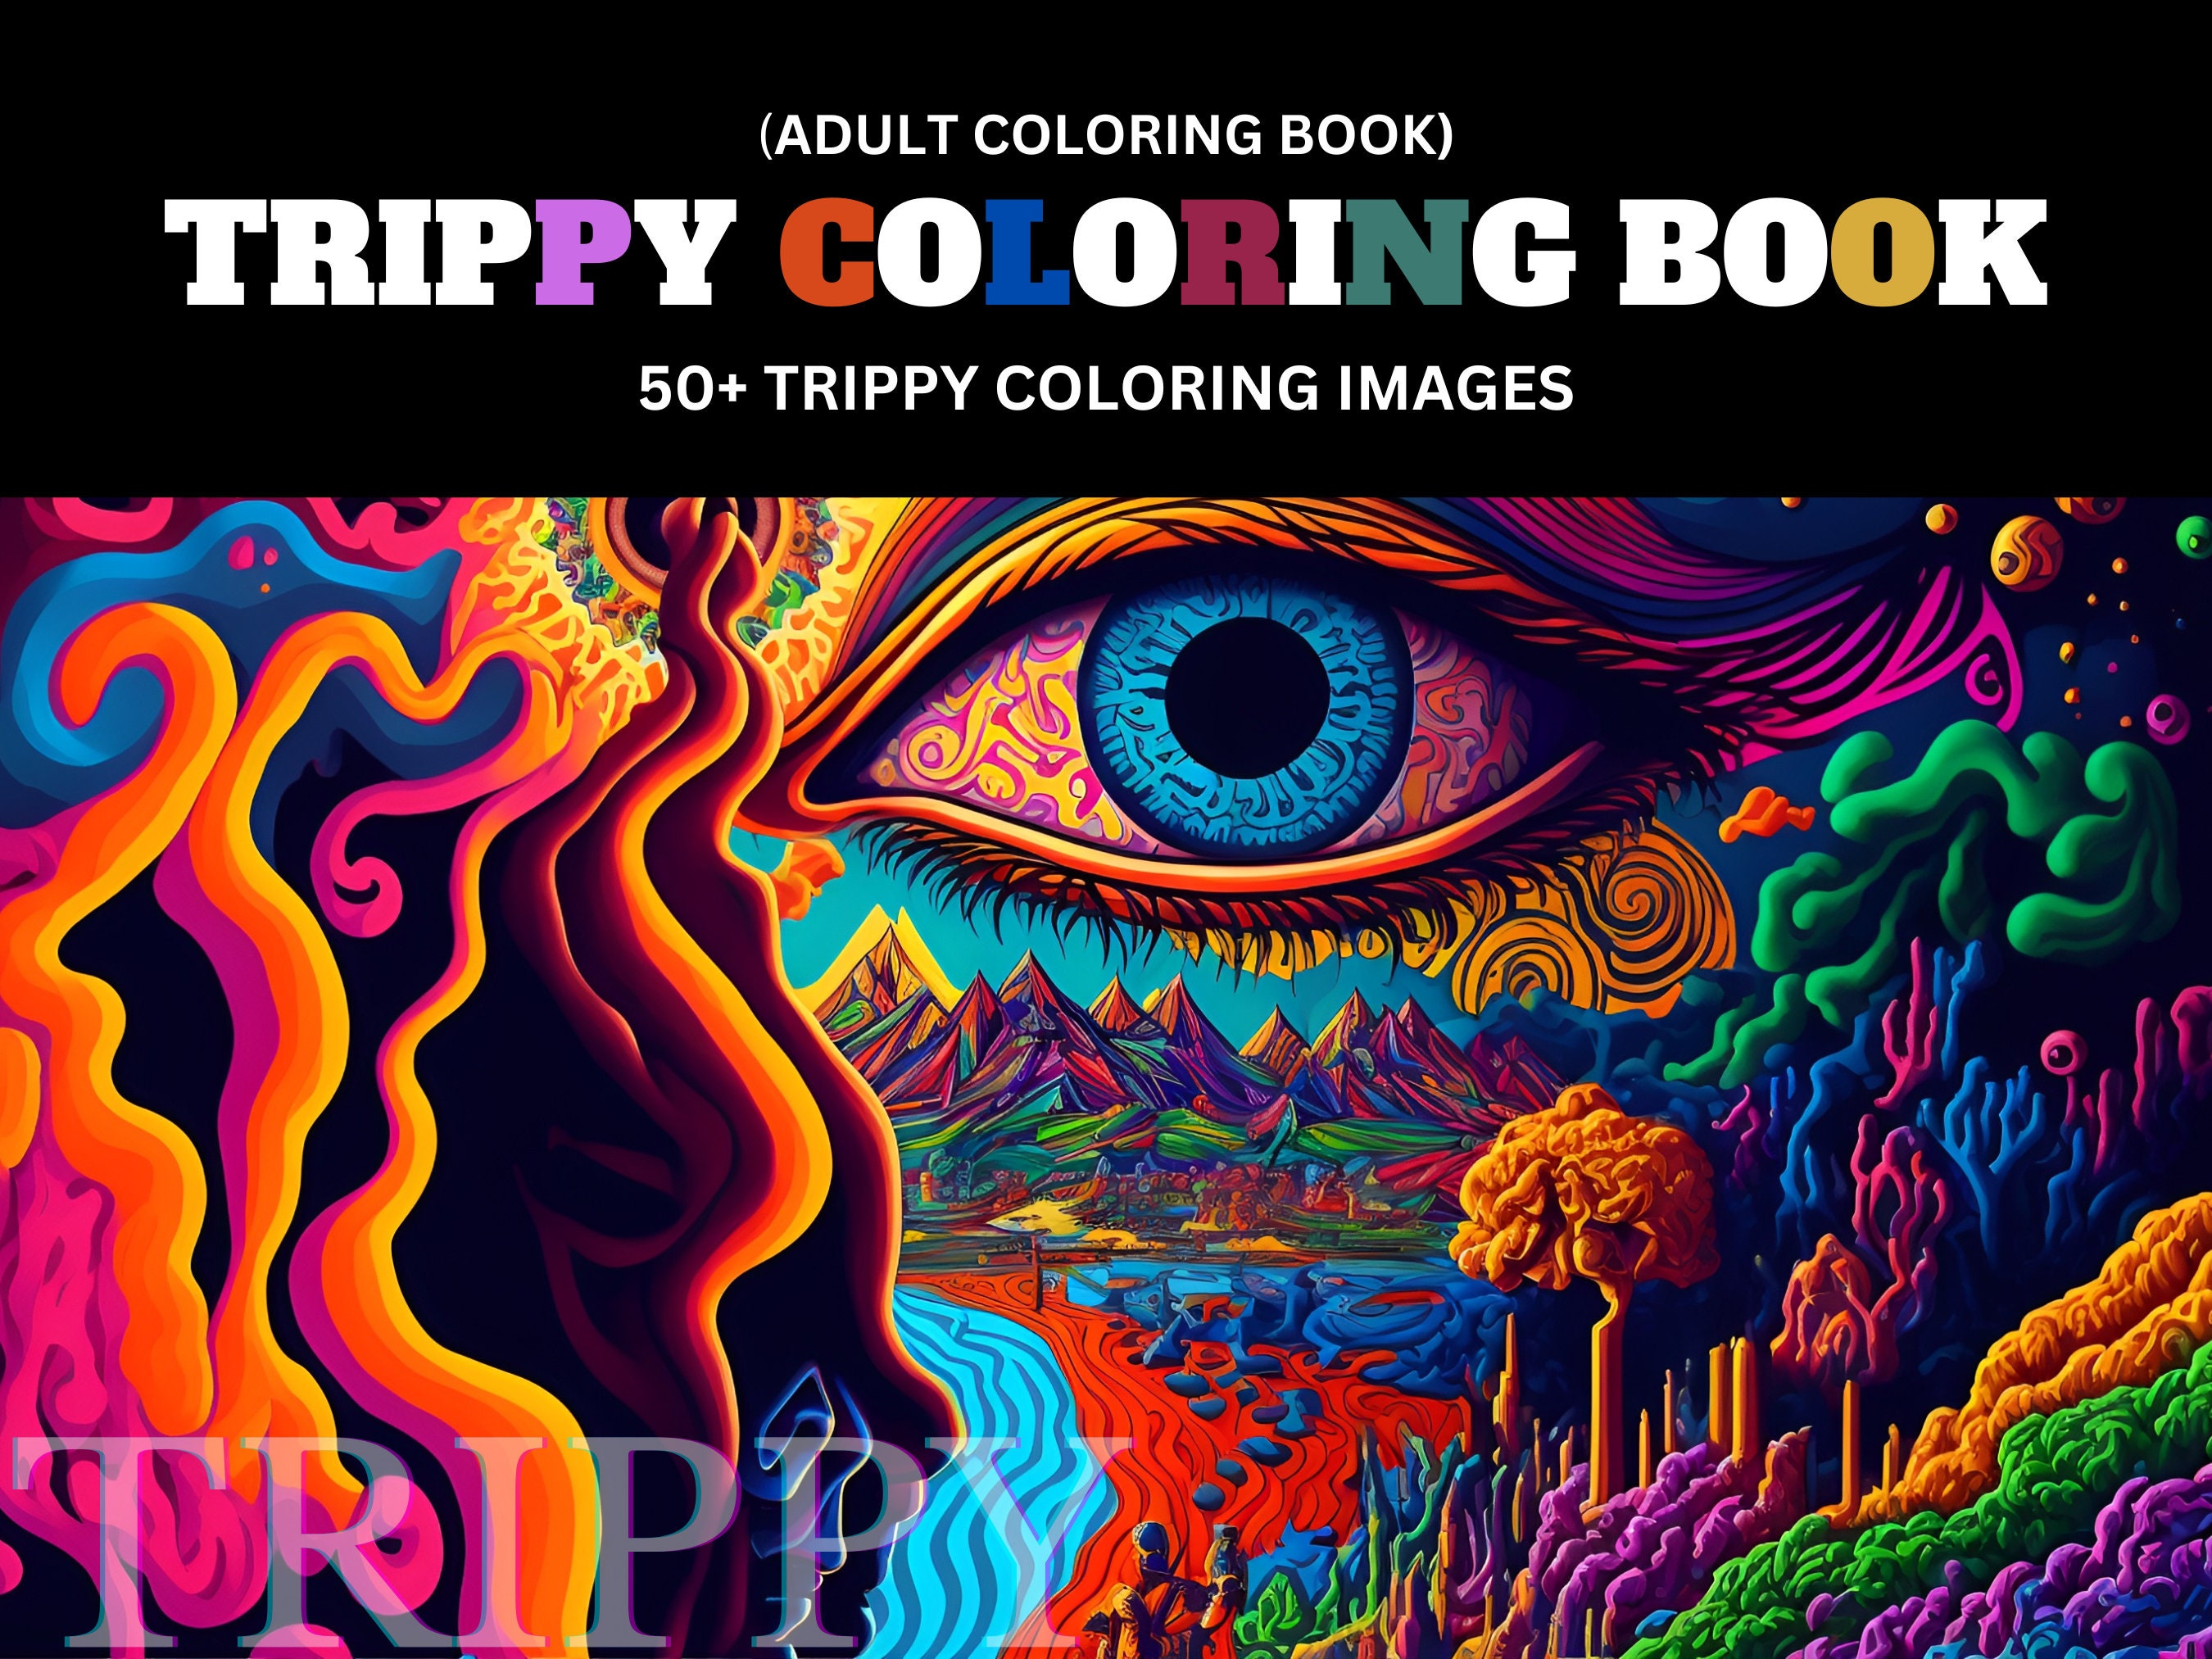 Stoner Coloring Book for Adults: The Stoner' s #1 Psychodelic Coloring Book  (Paperback)